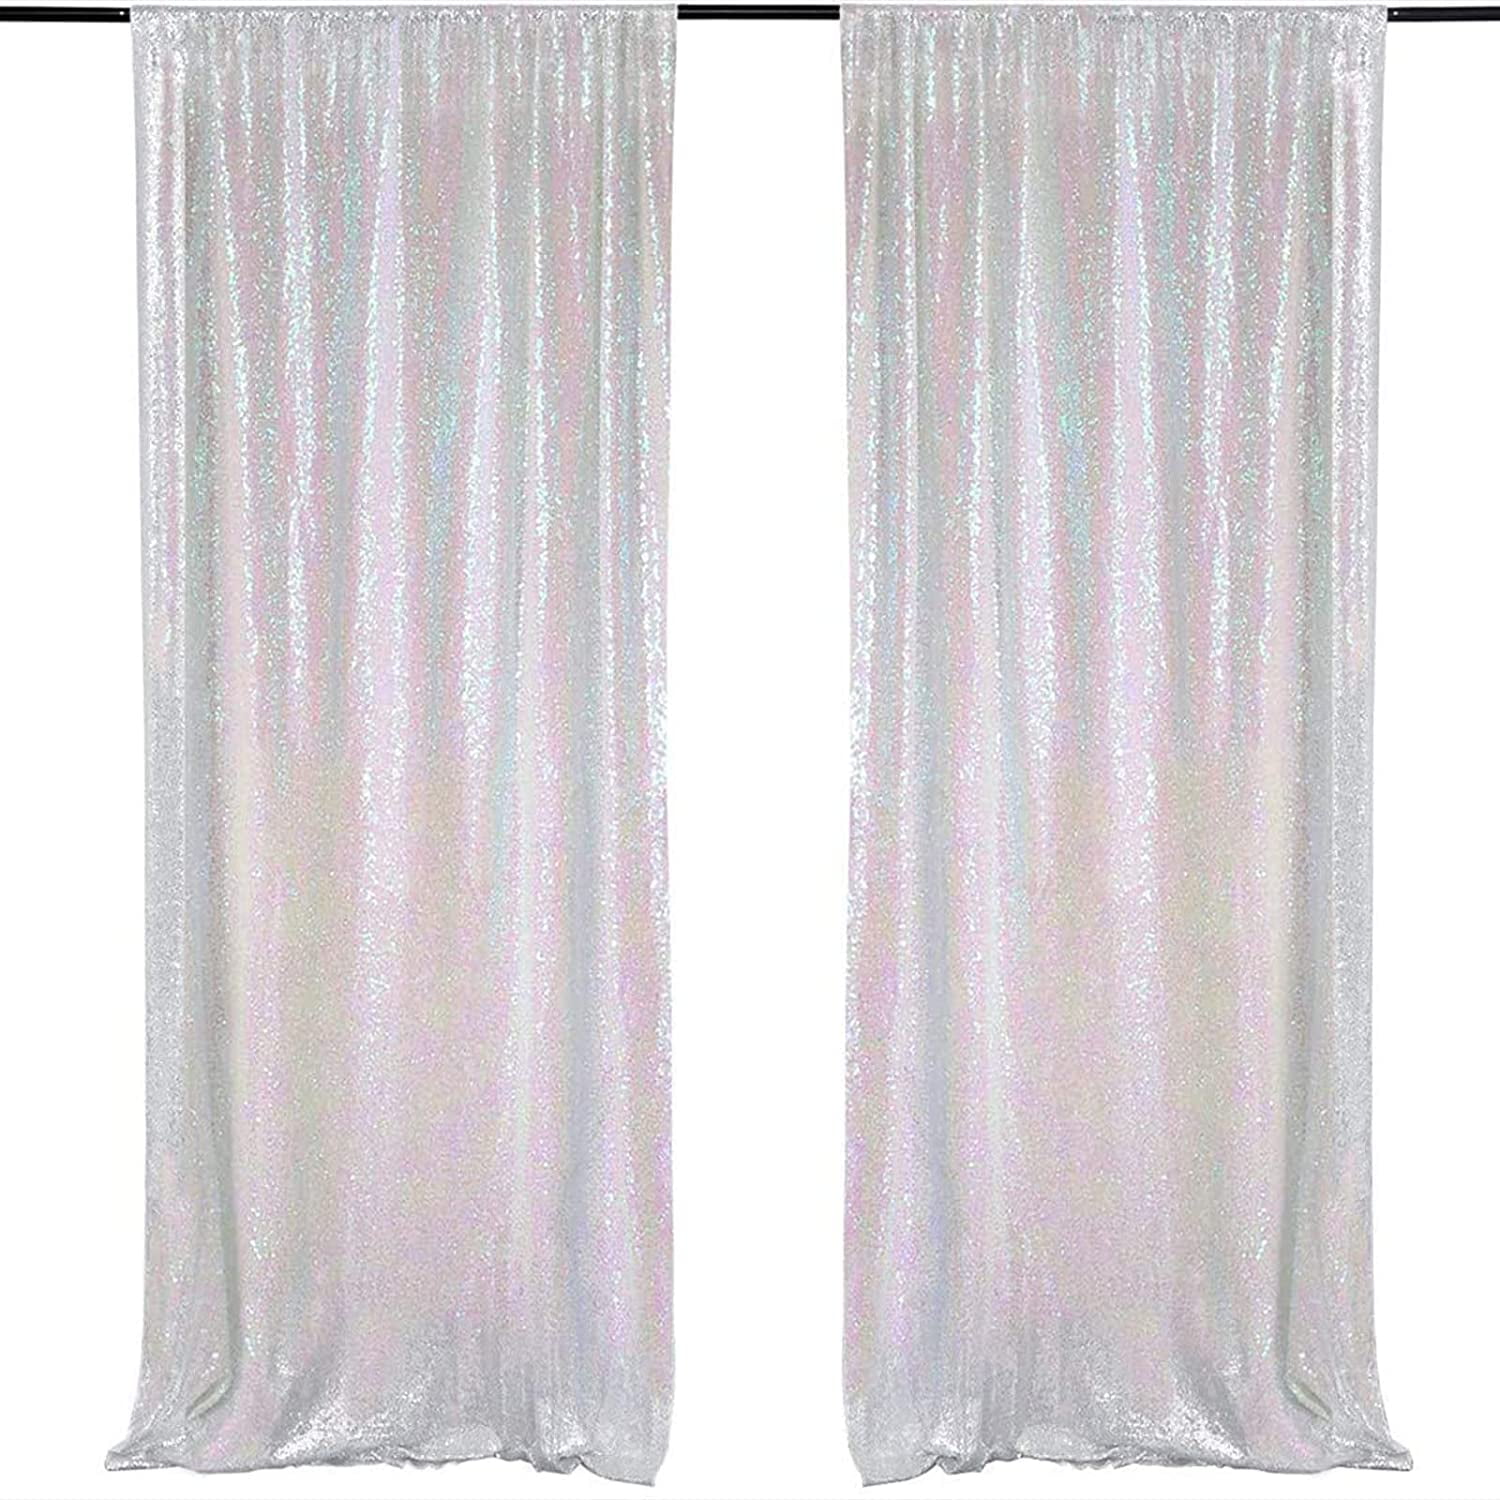 White Sequin Photography Backdrop Curtains 2 Panels 2FTx8FT Wedding Photo Backdrop Glitter Birthday Bridal Party Curtains Sparkle Background Drapes 